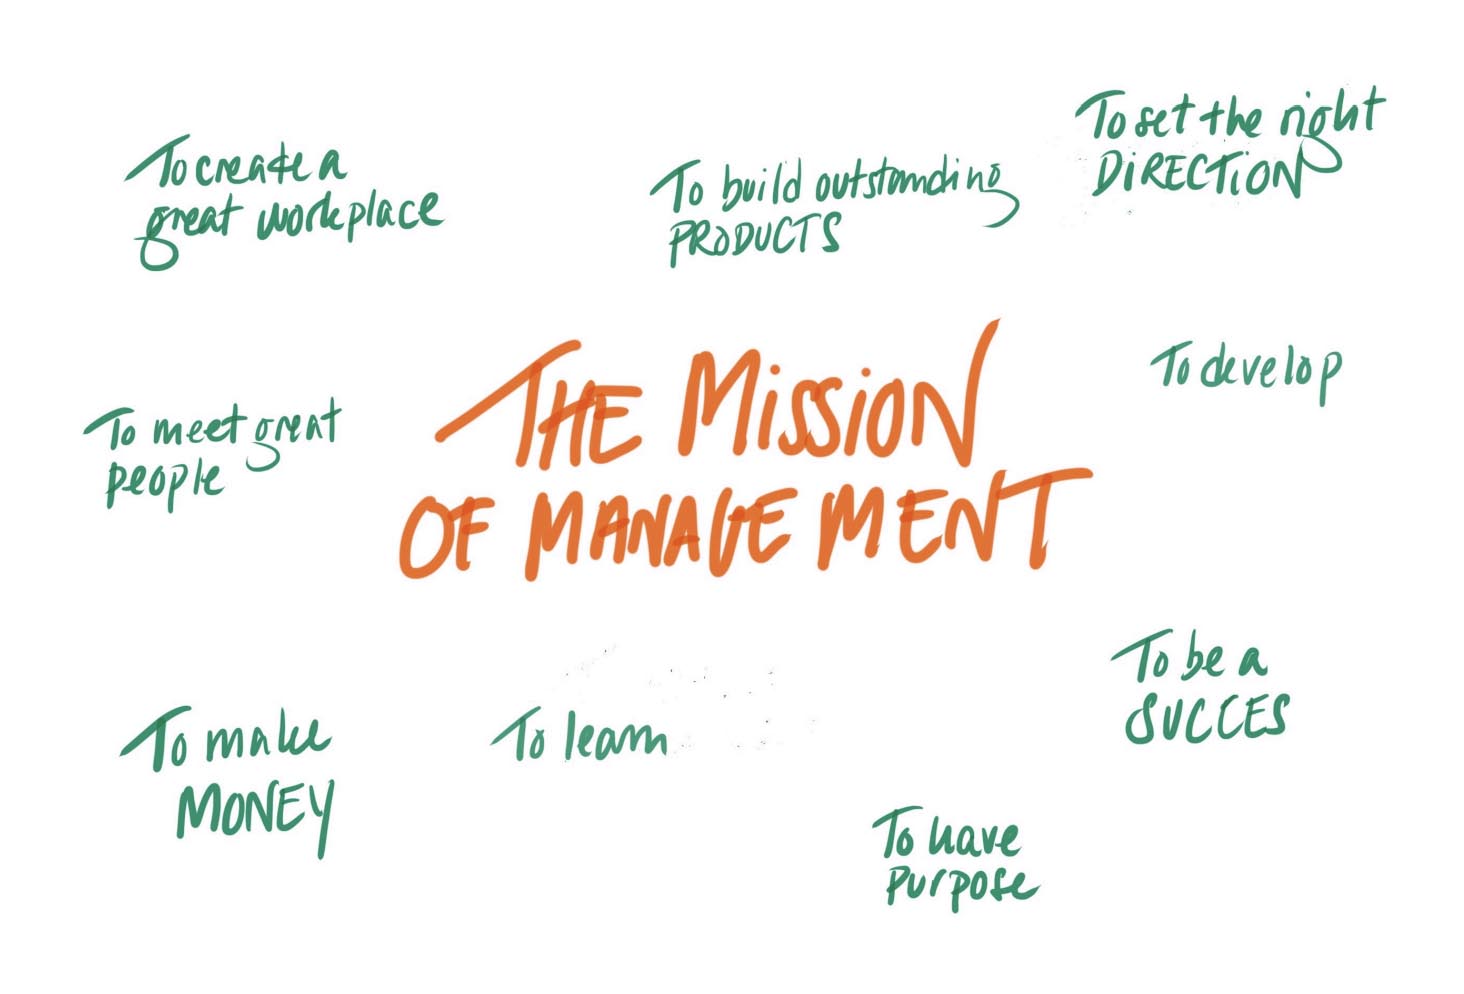 The focus of management is often centered on what the upper-part of an organization wants.